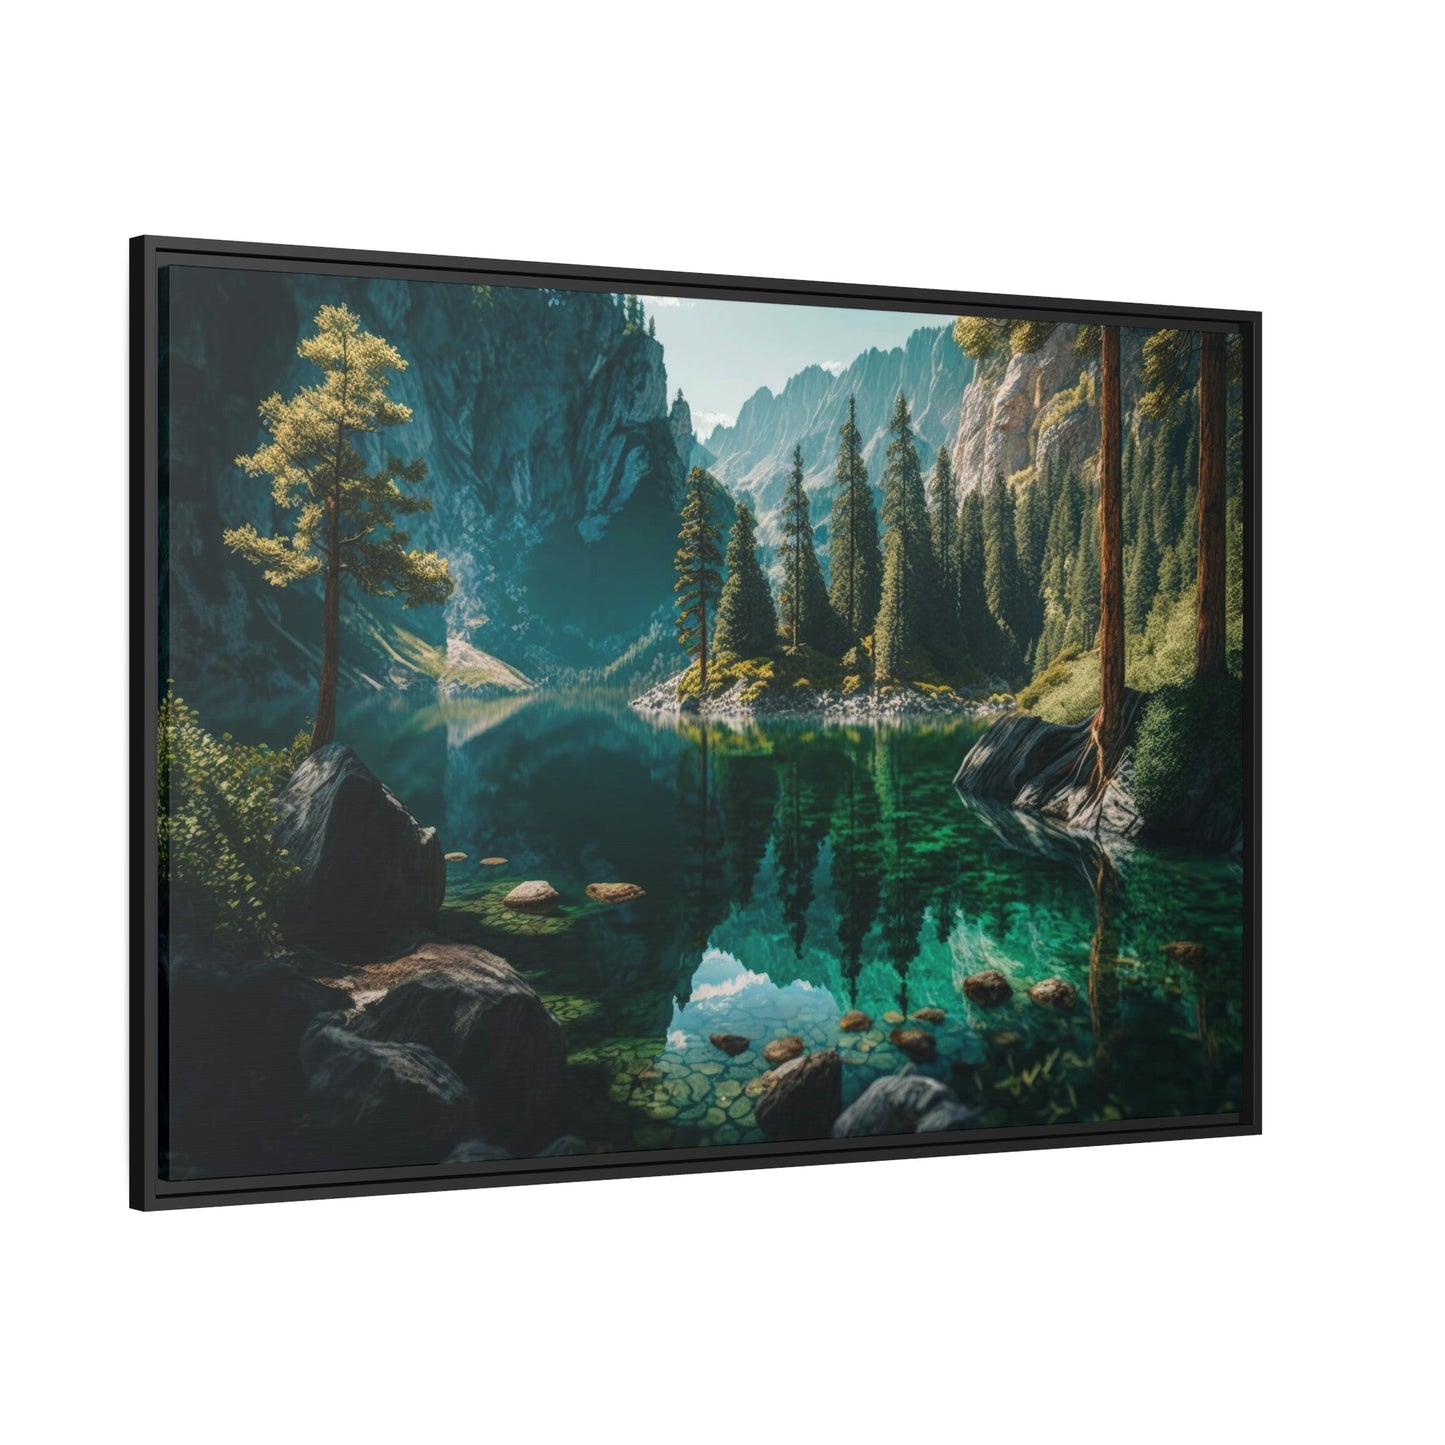 Flowing Beauty: Wall Art and Canvas Print of Lakes and Rivers